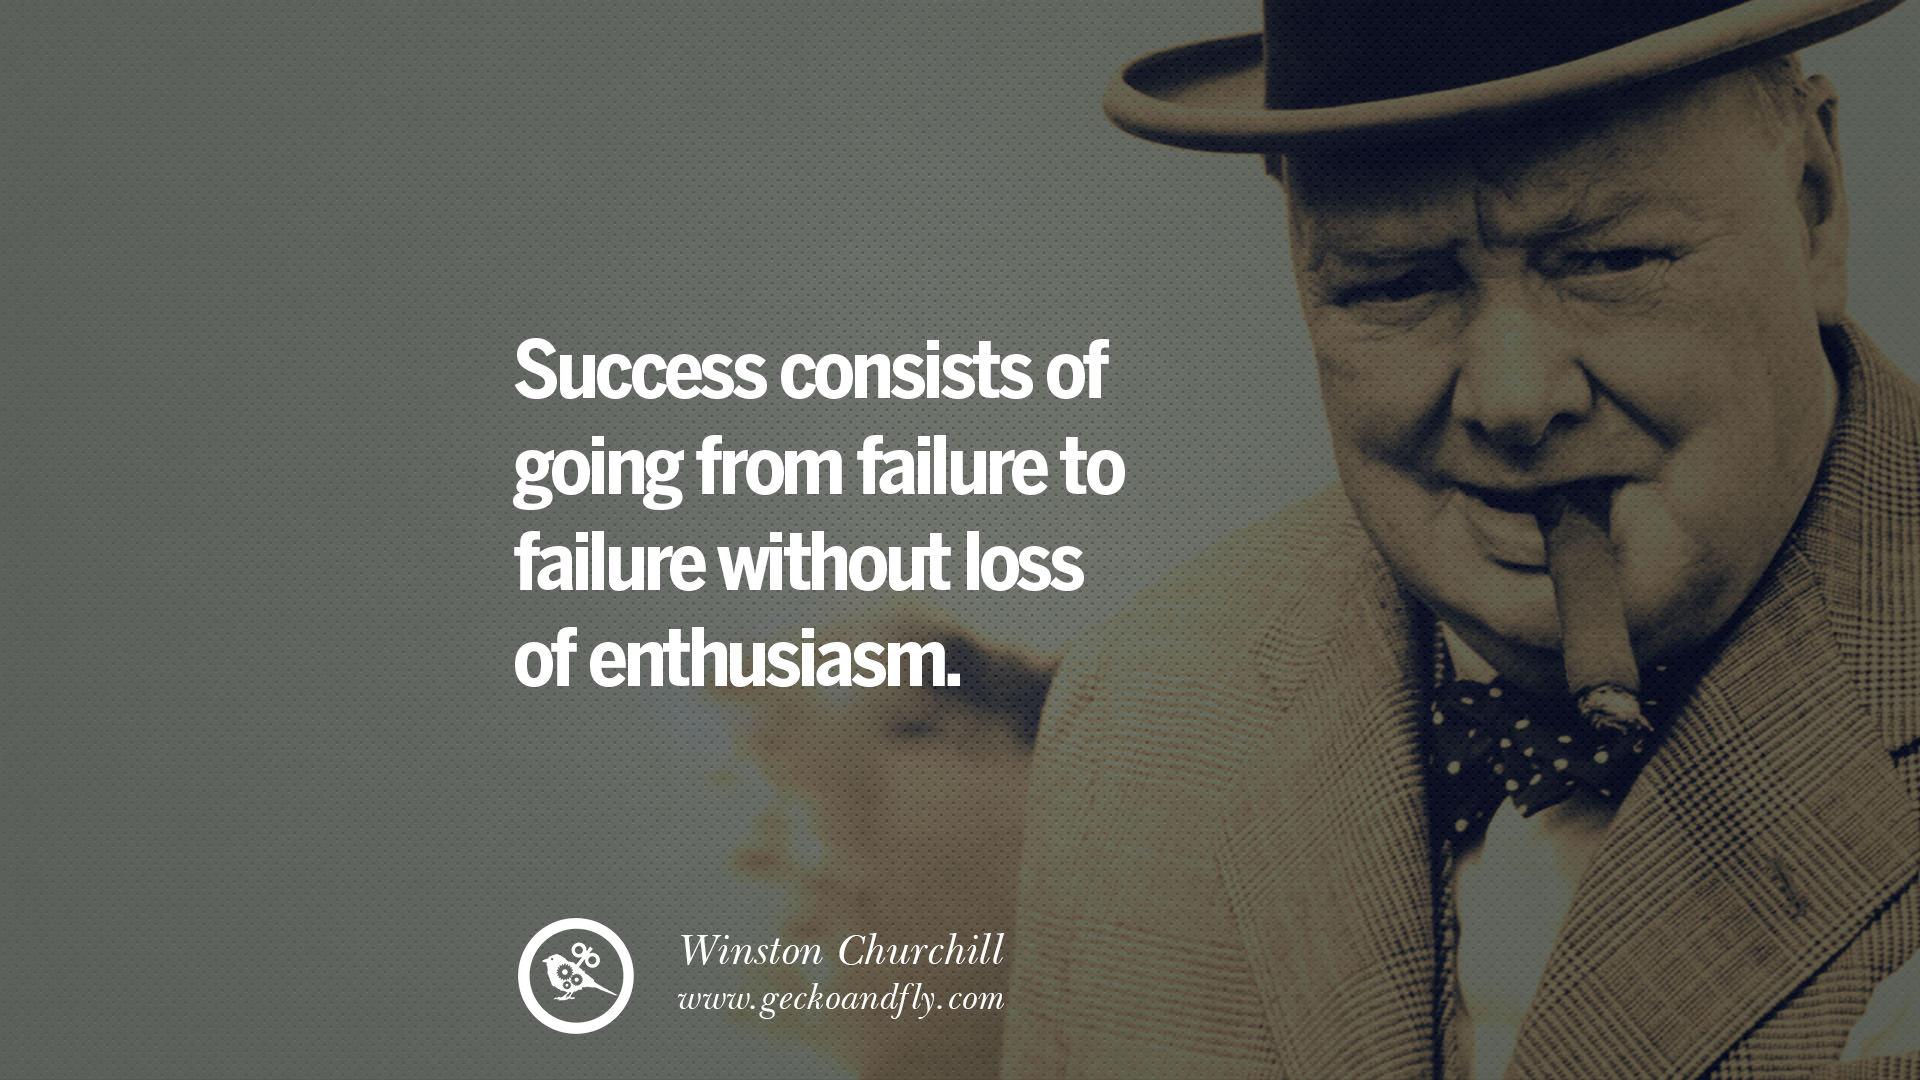 Sir Winston Churchill Quotes and Speeches on Success, Courage